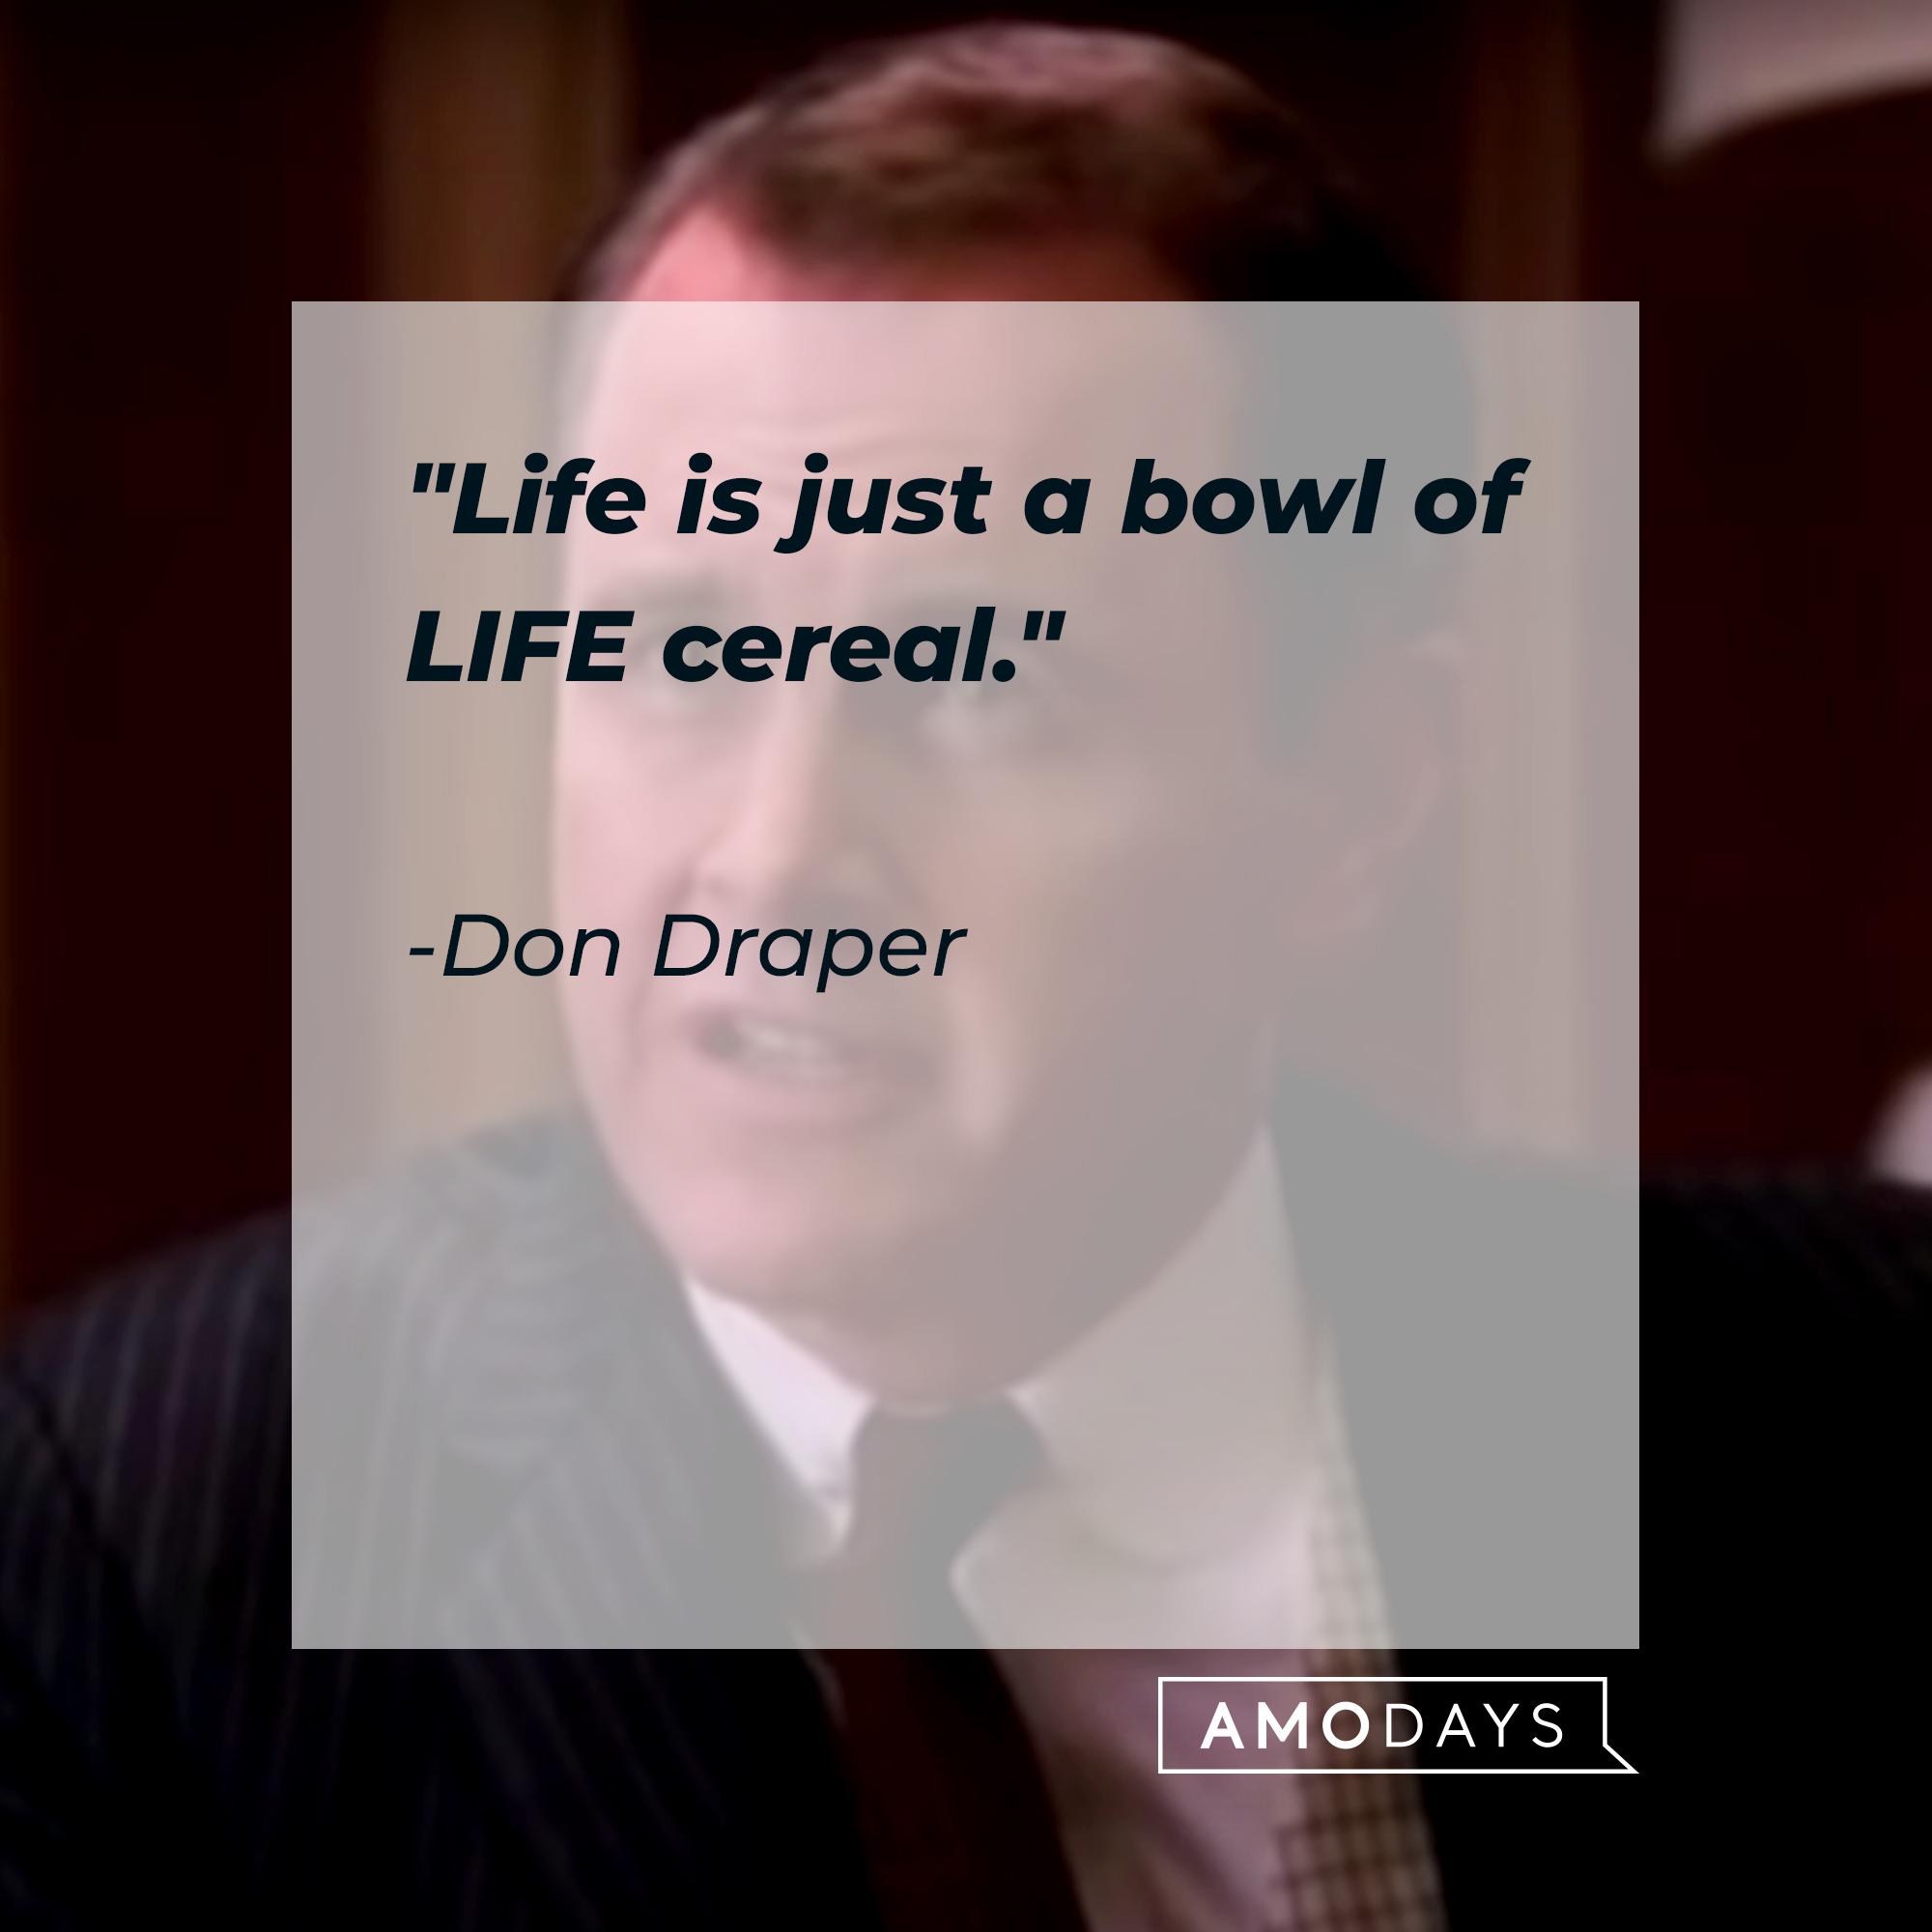 Don Draper's quote: "Life is just a bowl of LIFE cereal." | Source: Facebook.com/MadMen